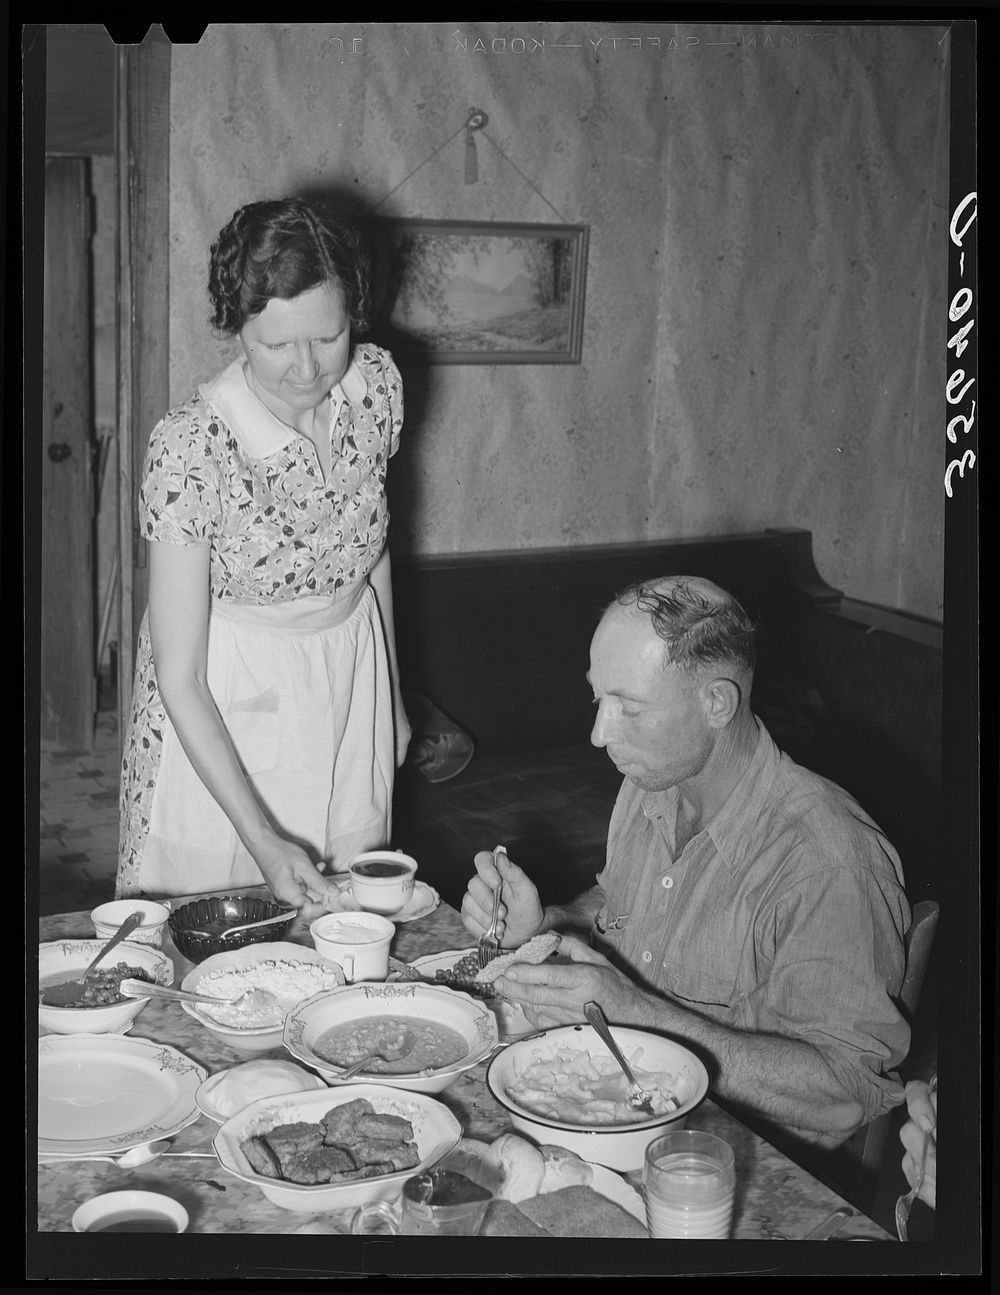 Dinner on ranch of rehabilitation borrower during goat shearing and kidding season. Kimble County, Texas. The man is a…